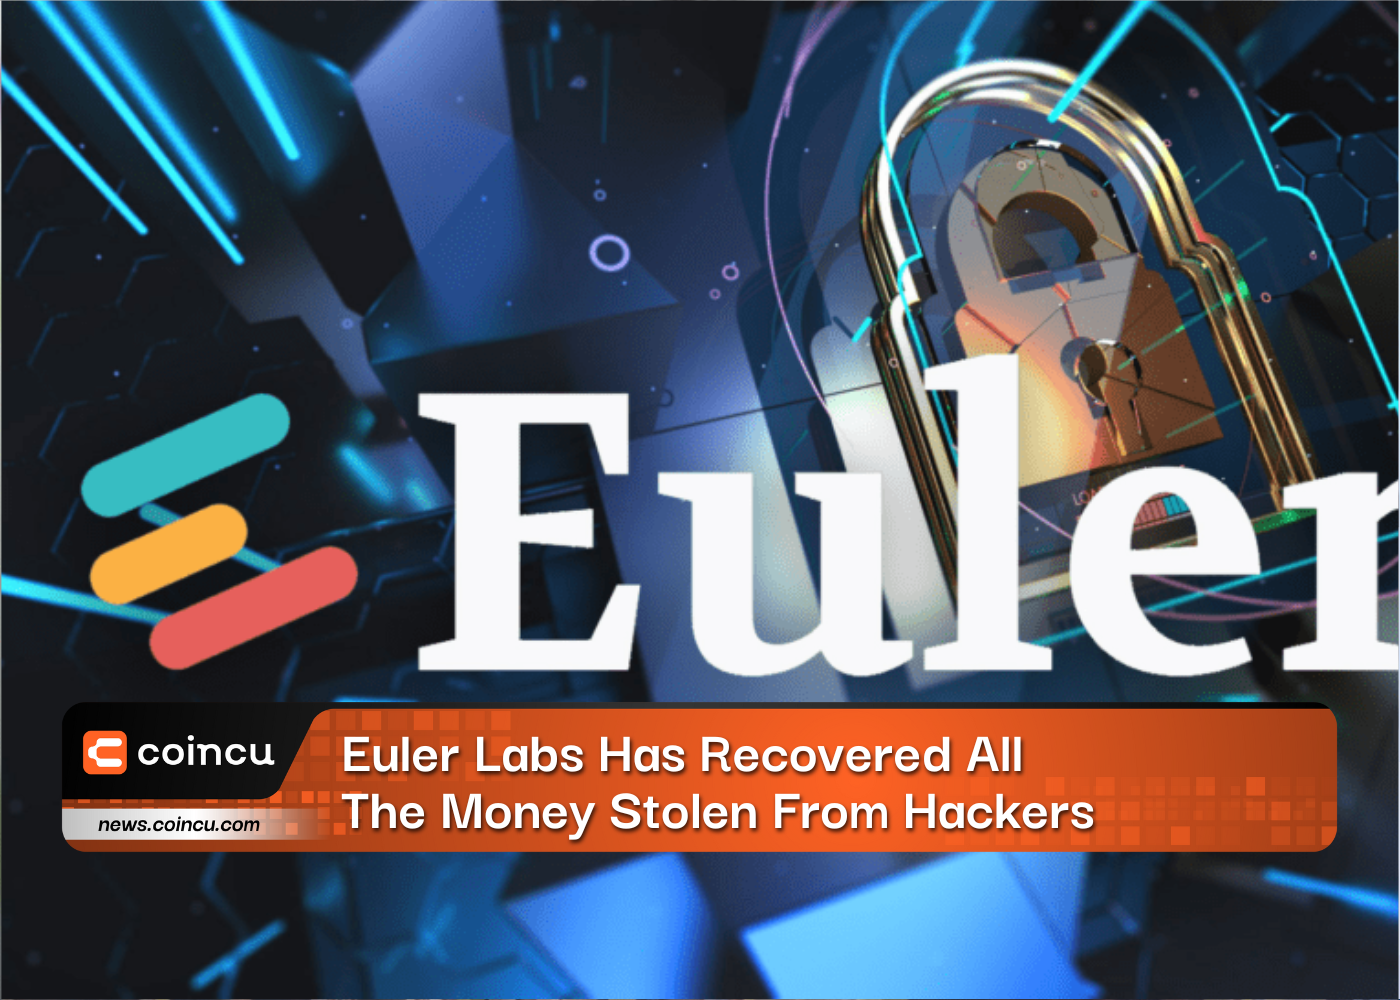 Euler Labs Has Recovered All The Money Stolen From Hackers